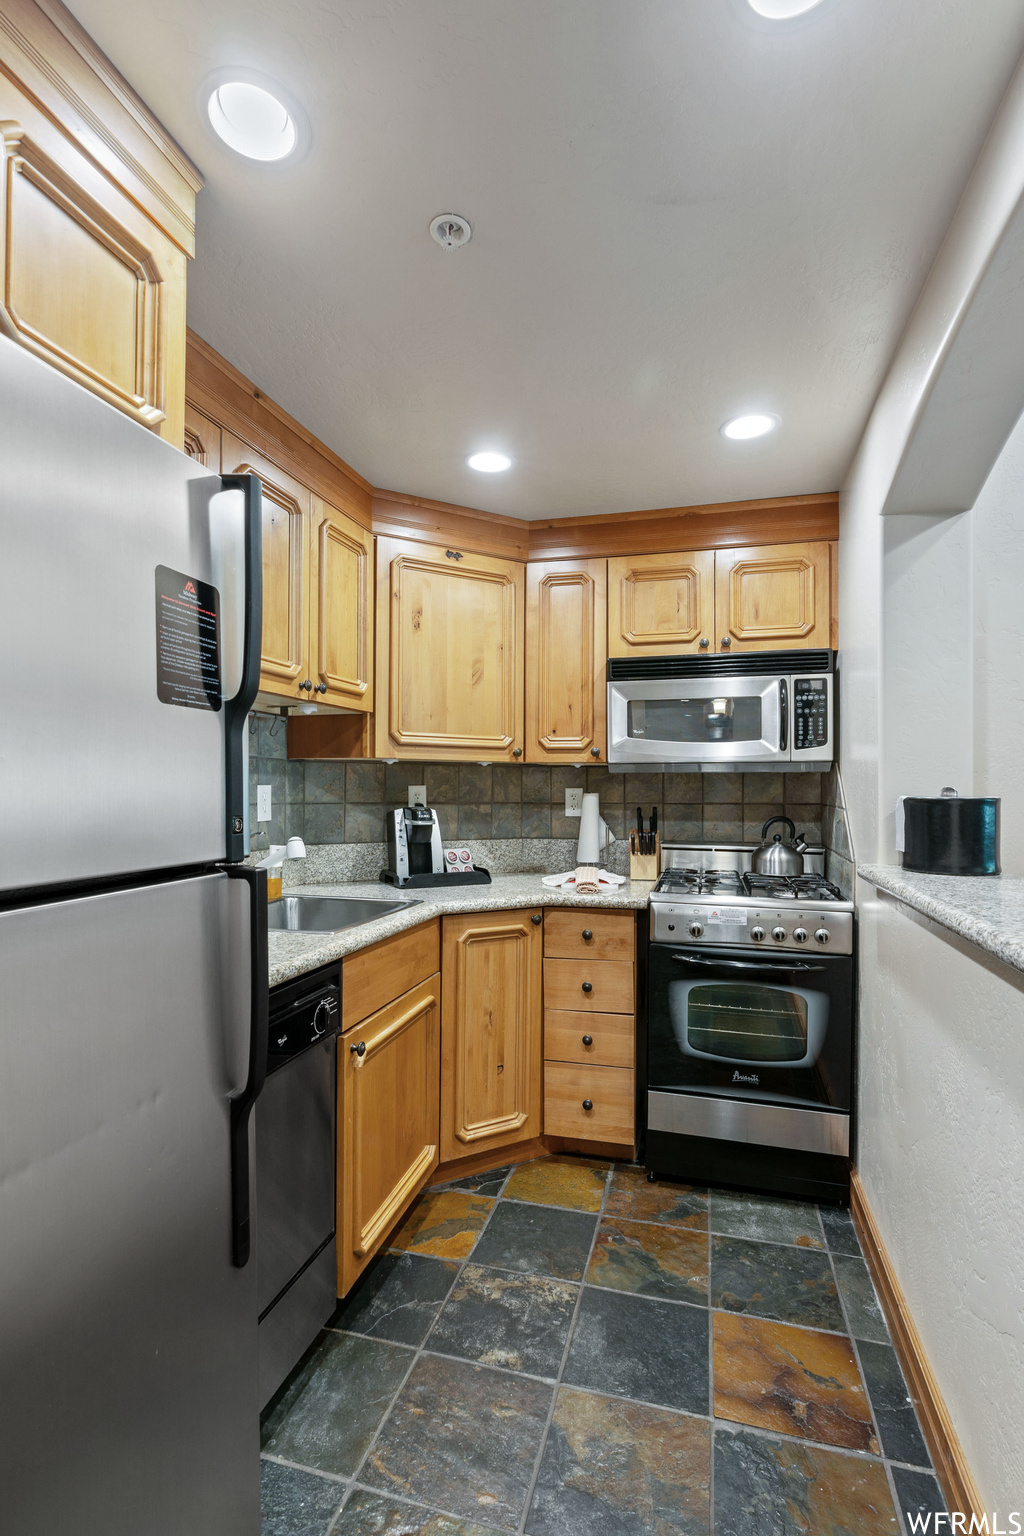 Kitchen with microwave, dishwasher, refrigerator, gas range oven, light countertops, and dark tile floors